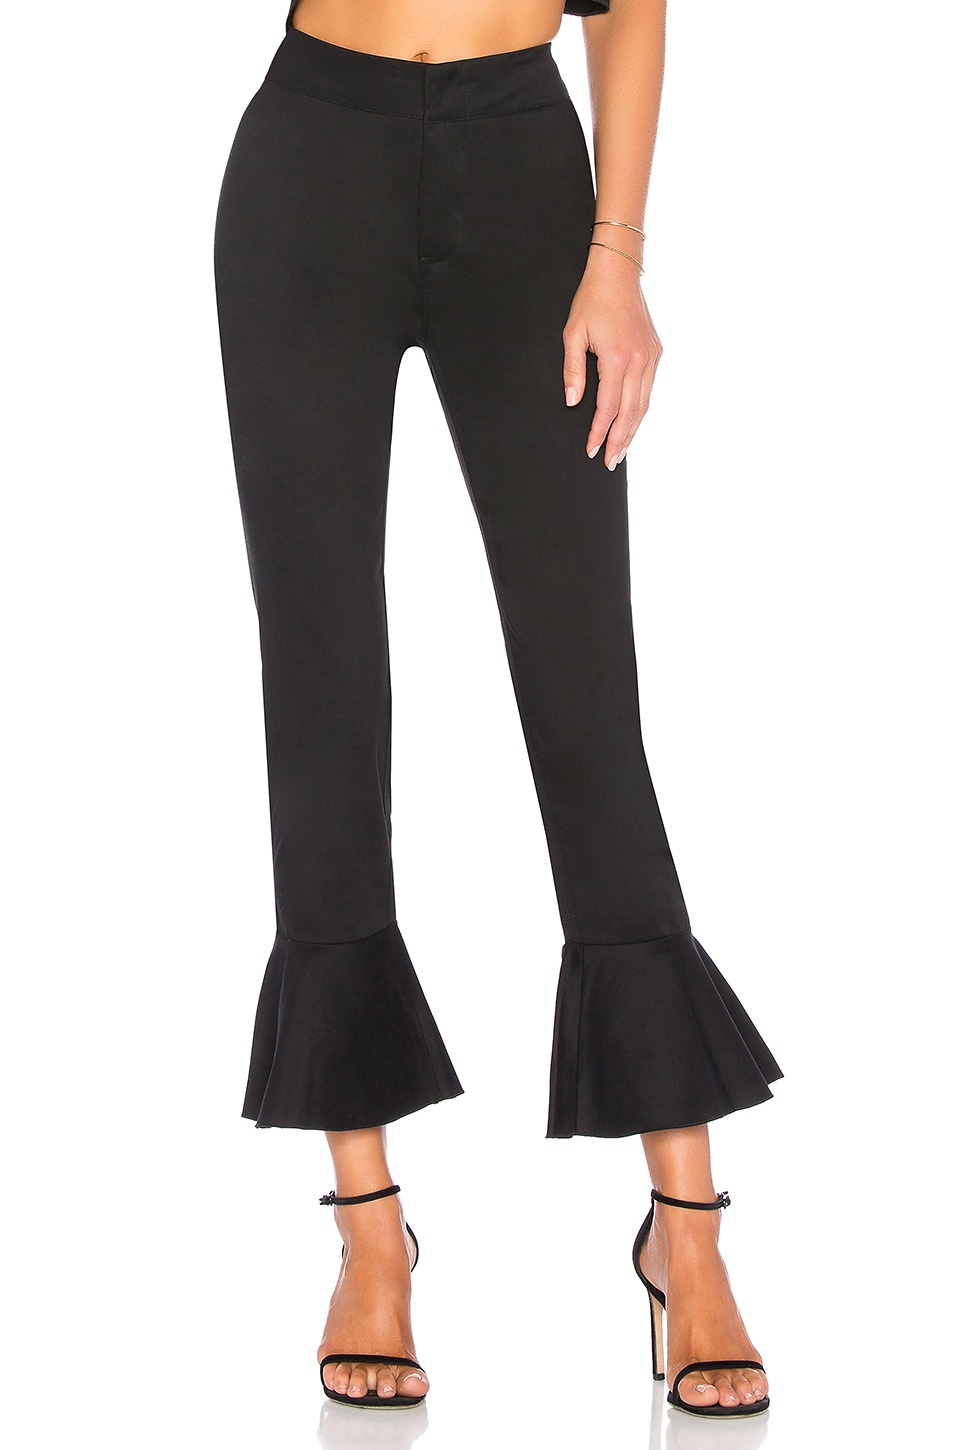 LIONESS LIONESS RUNAWAY PANTS IN BLACK.,LIOR-WP4